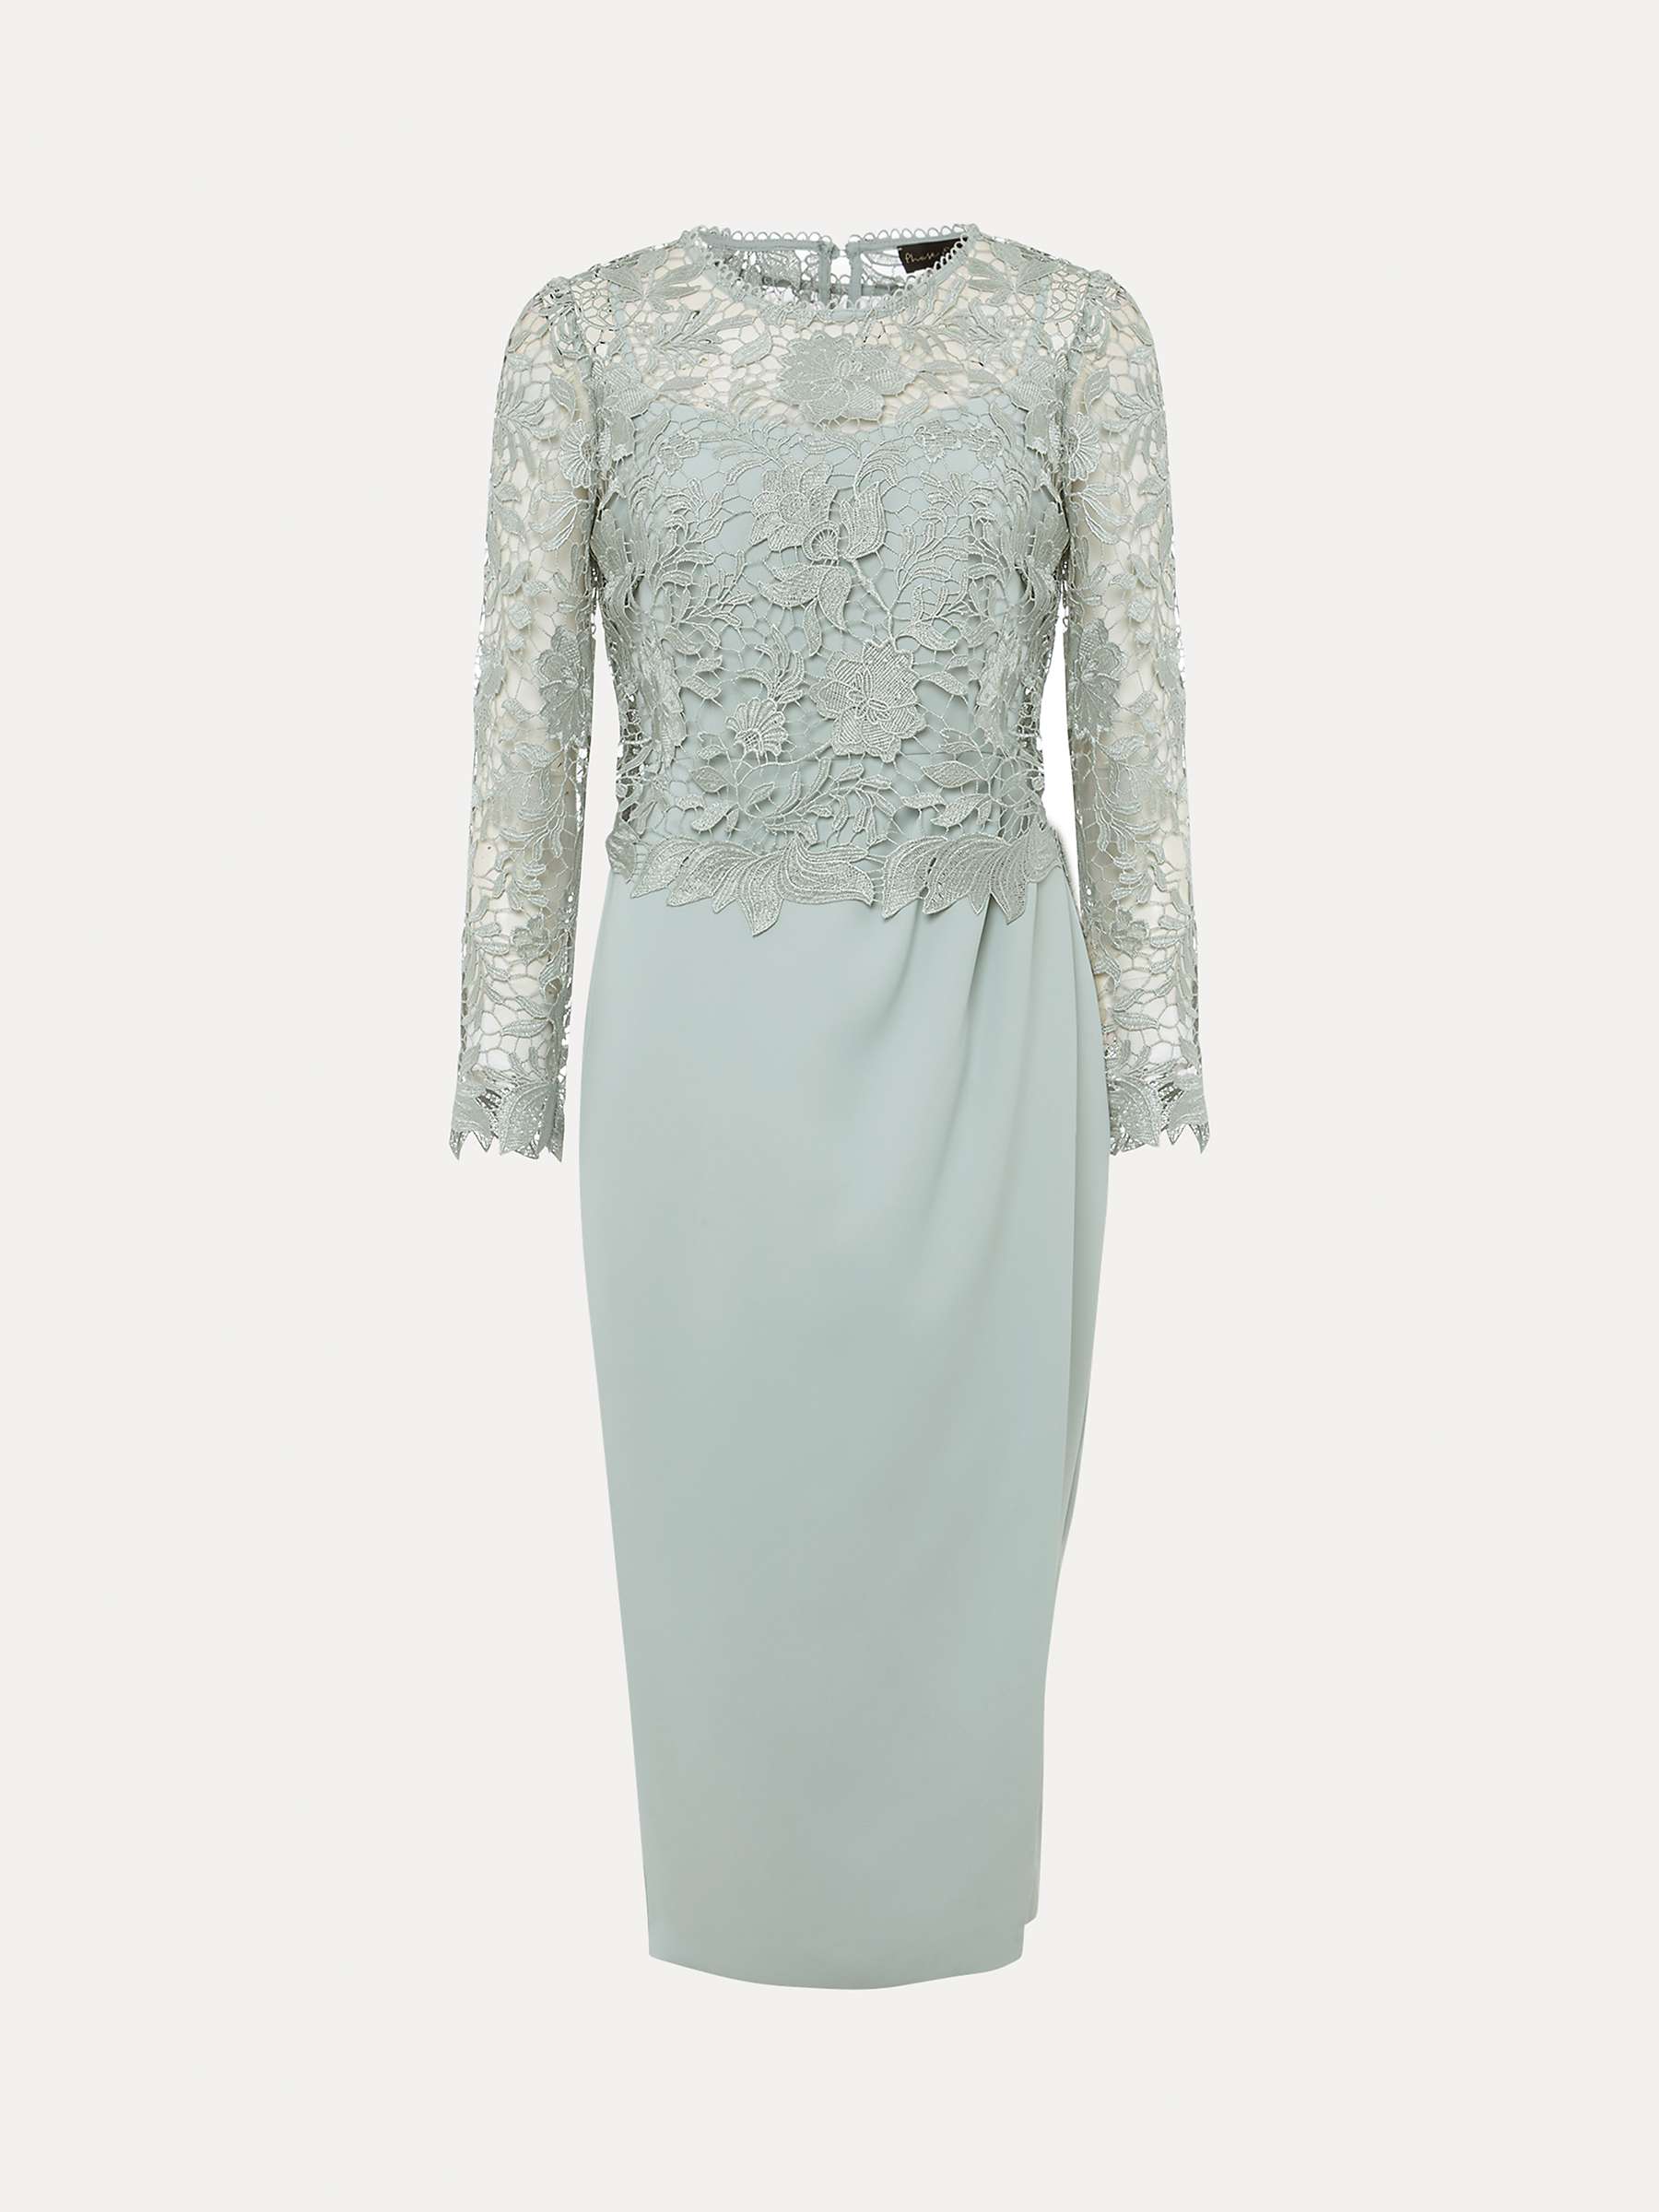 Buy Phase Eight Adeline Lace Bodice Dress Online at johnlewis.com